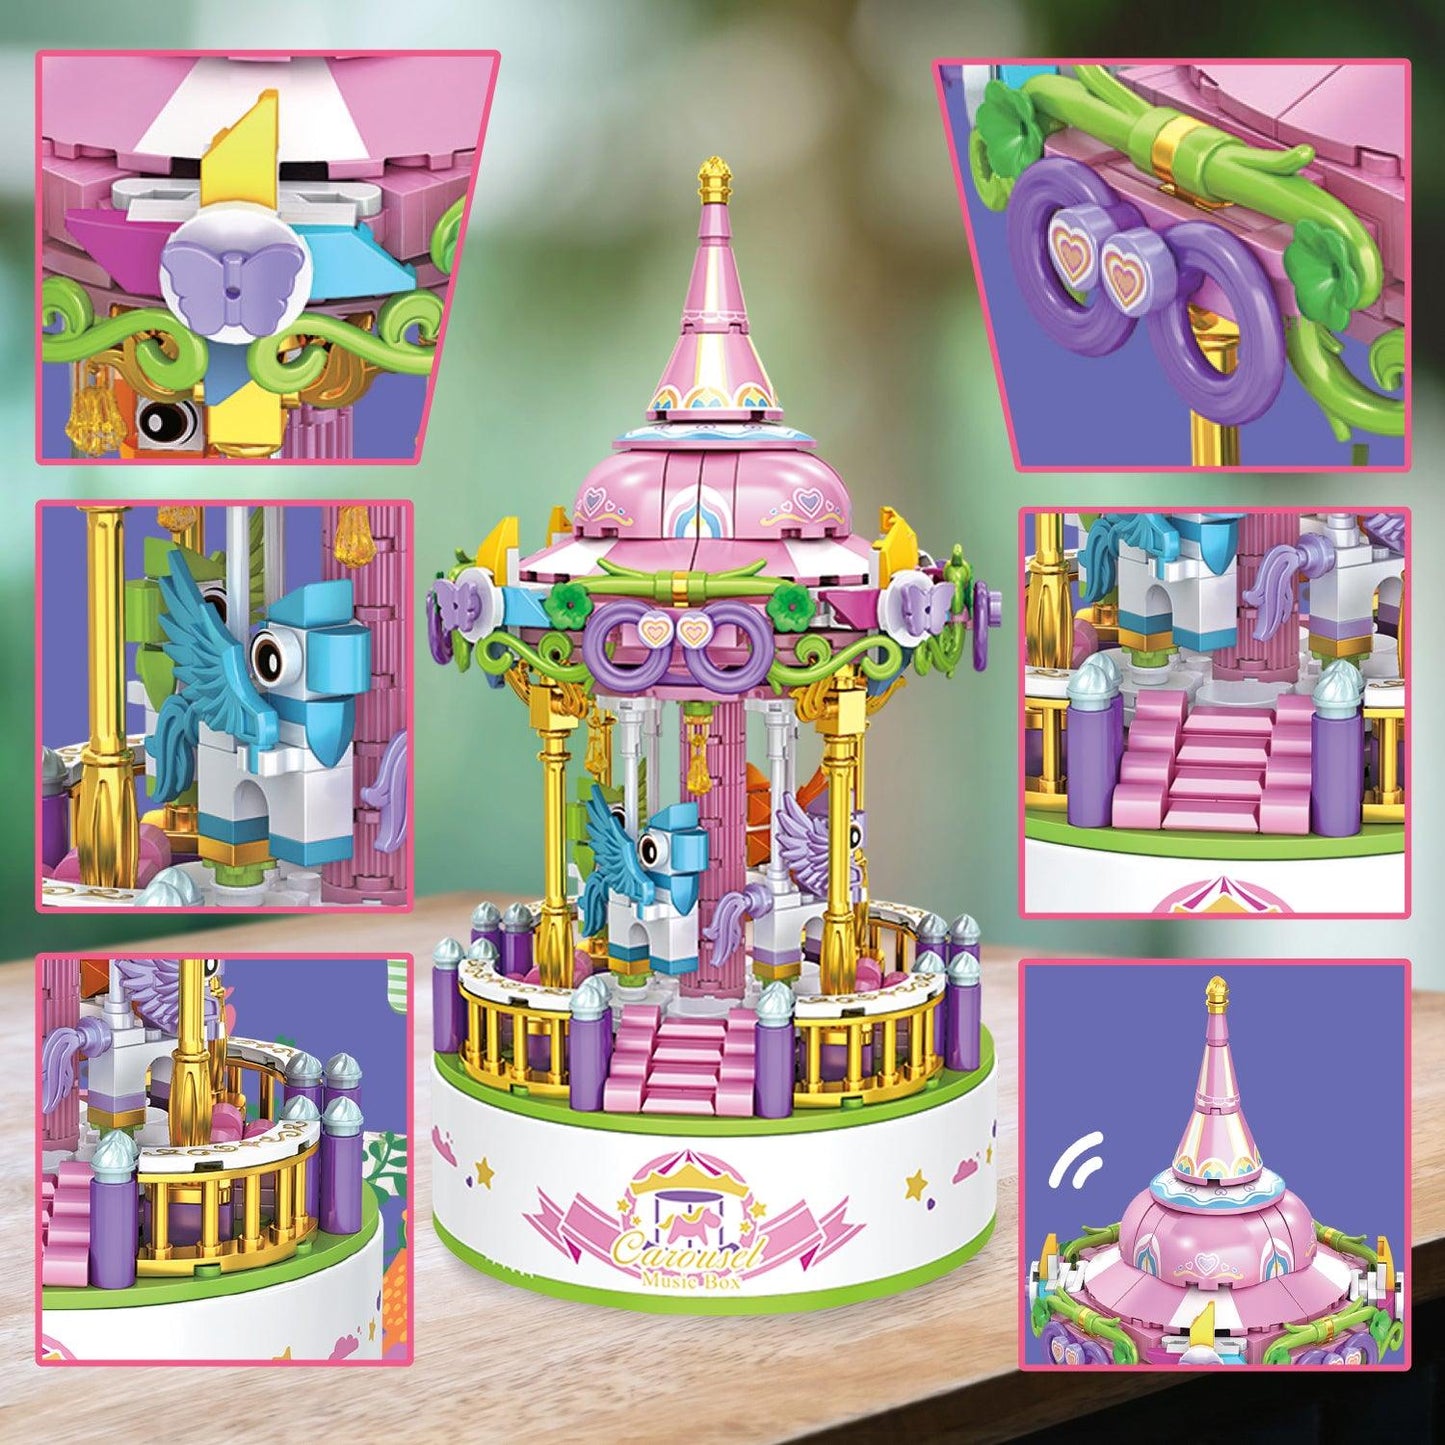 BK02 Carousel Building Block Set with Music Box, 488 Pieces - Loomini